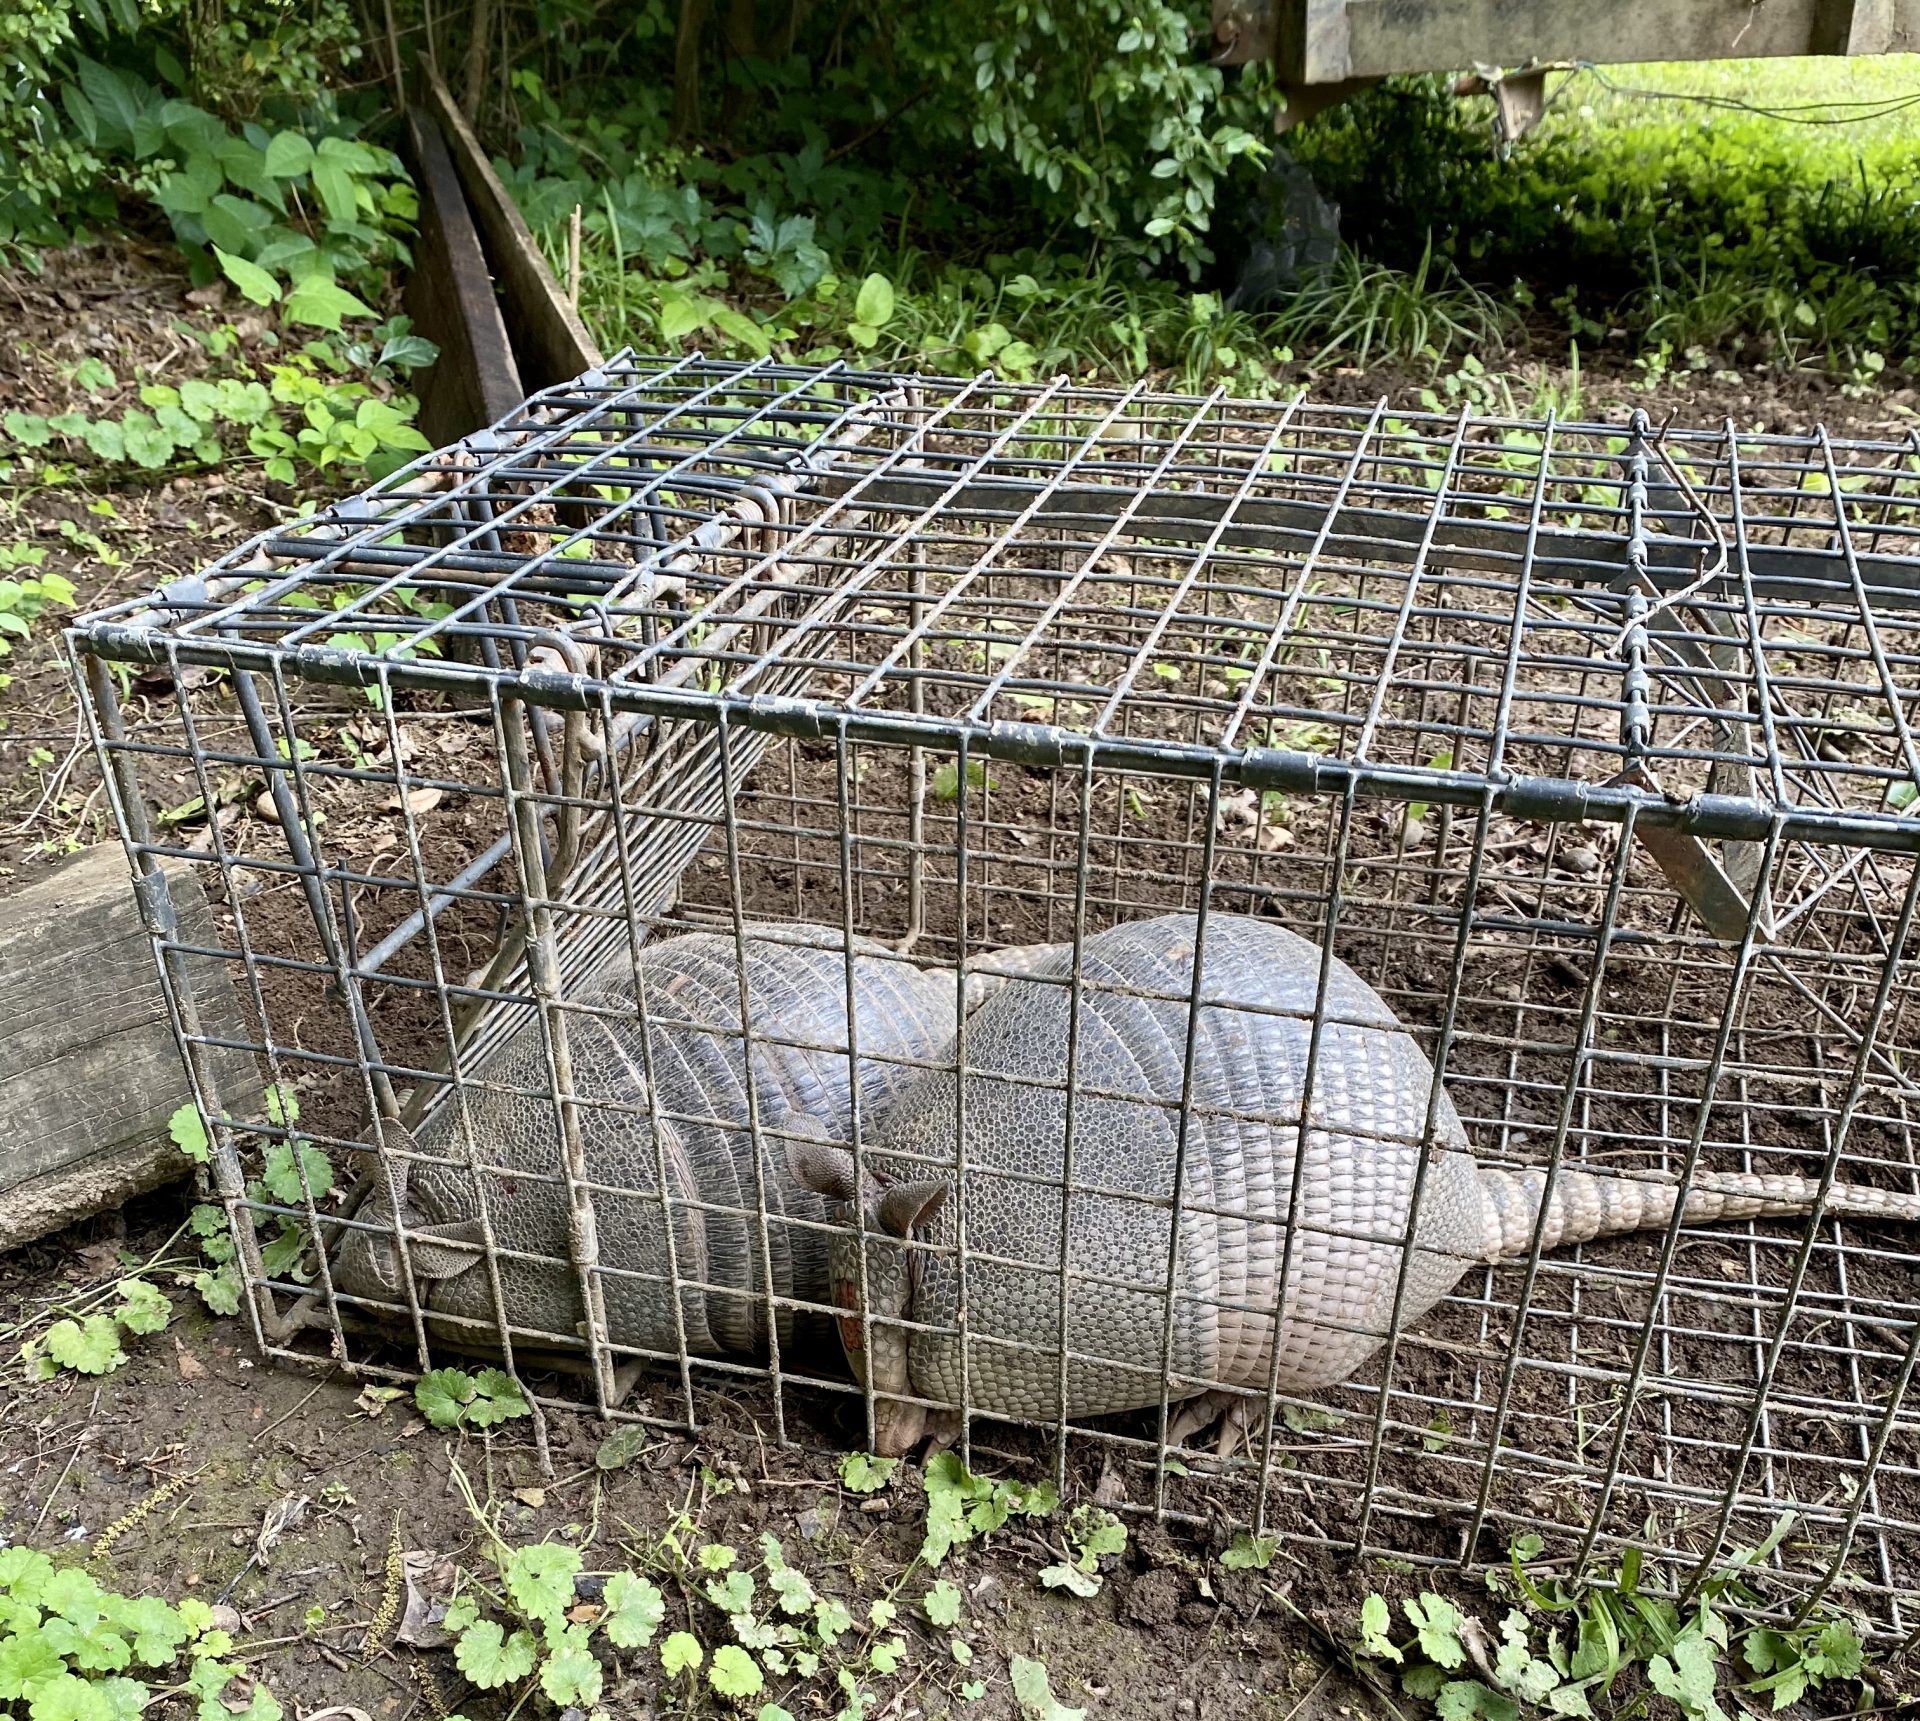 How To Get Rid Of Armadillos In Your Lawn